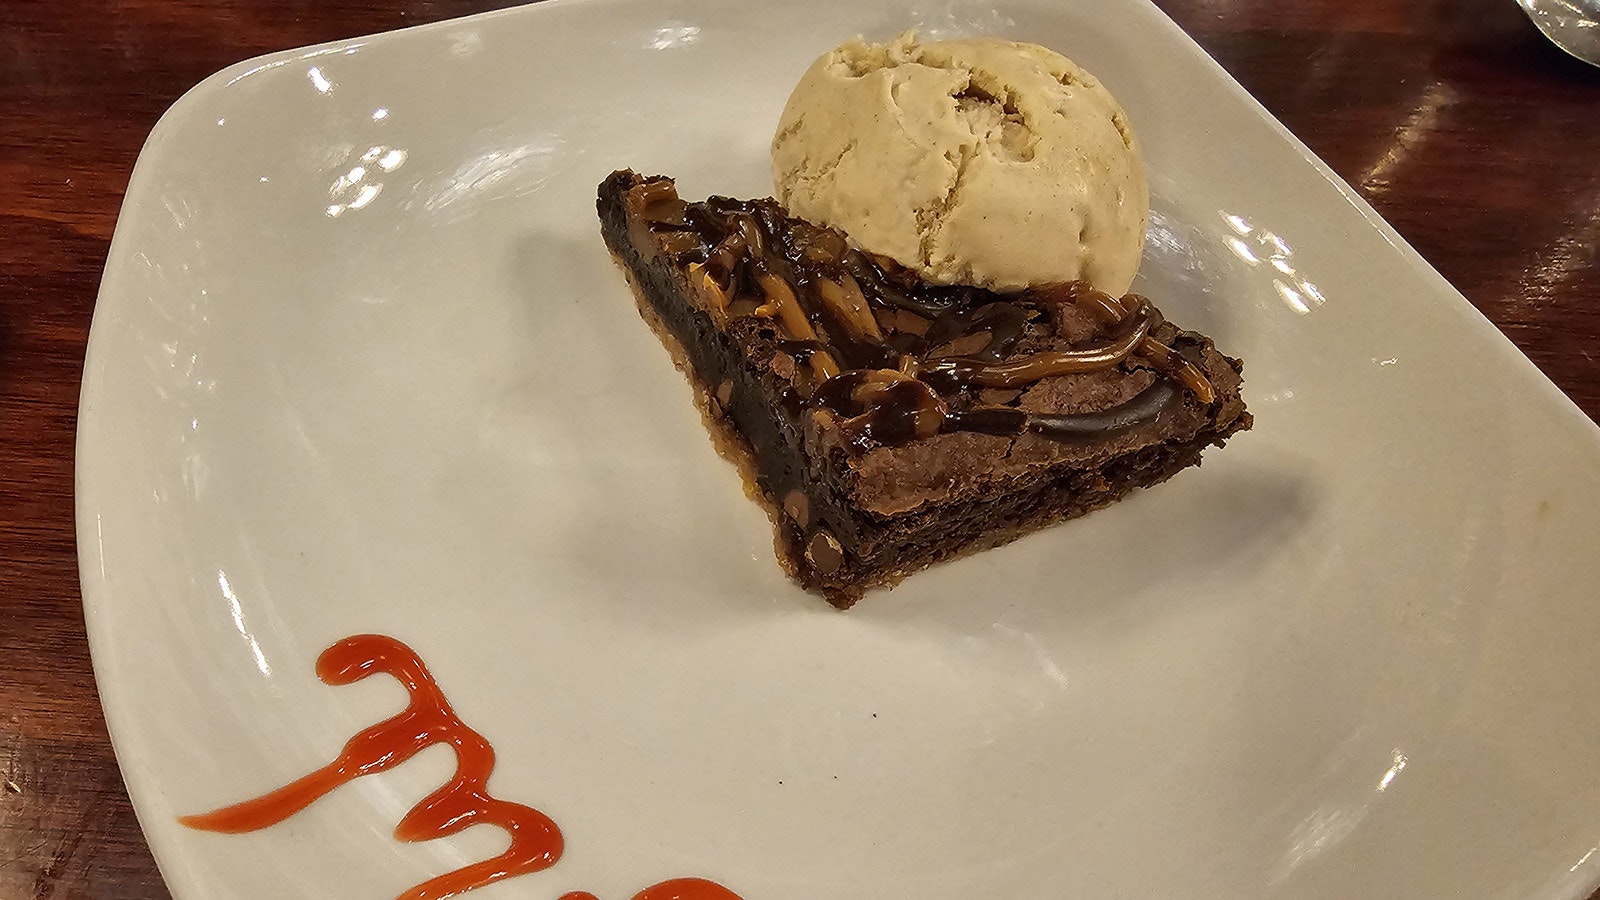 Desserts are something special at Miners and Stockmen's Steakhouse. There are usually three homemade options on the menu. Here’s the homemade brownie pie, topped with salted caramel and a dollop of cinnamon ice cream.